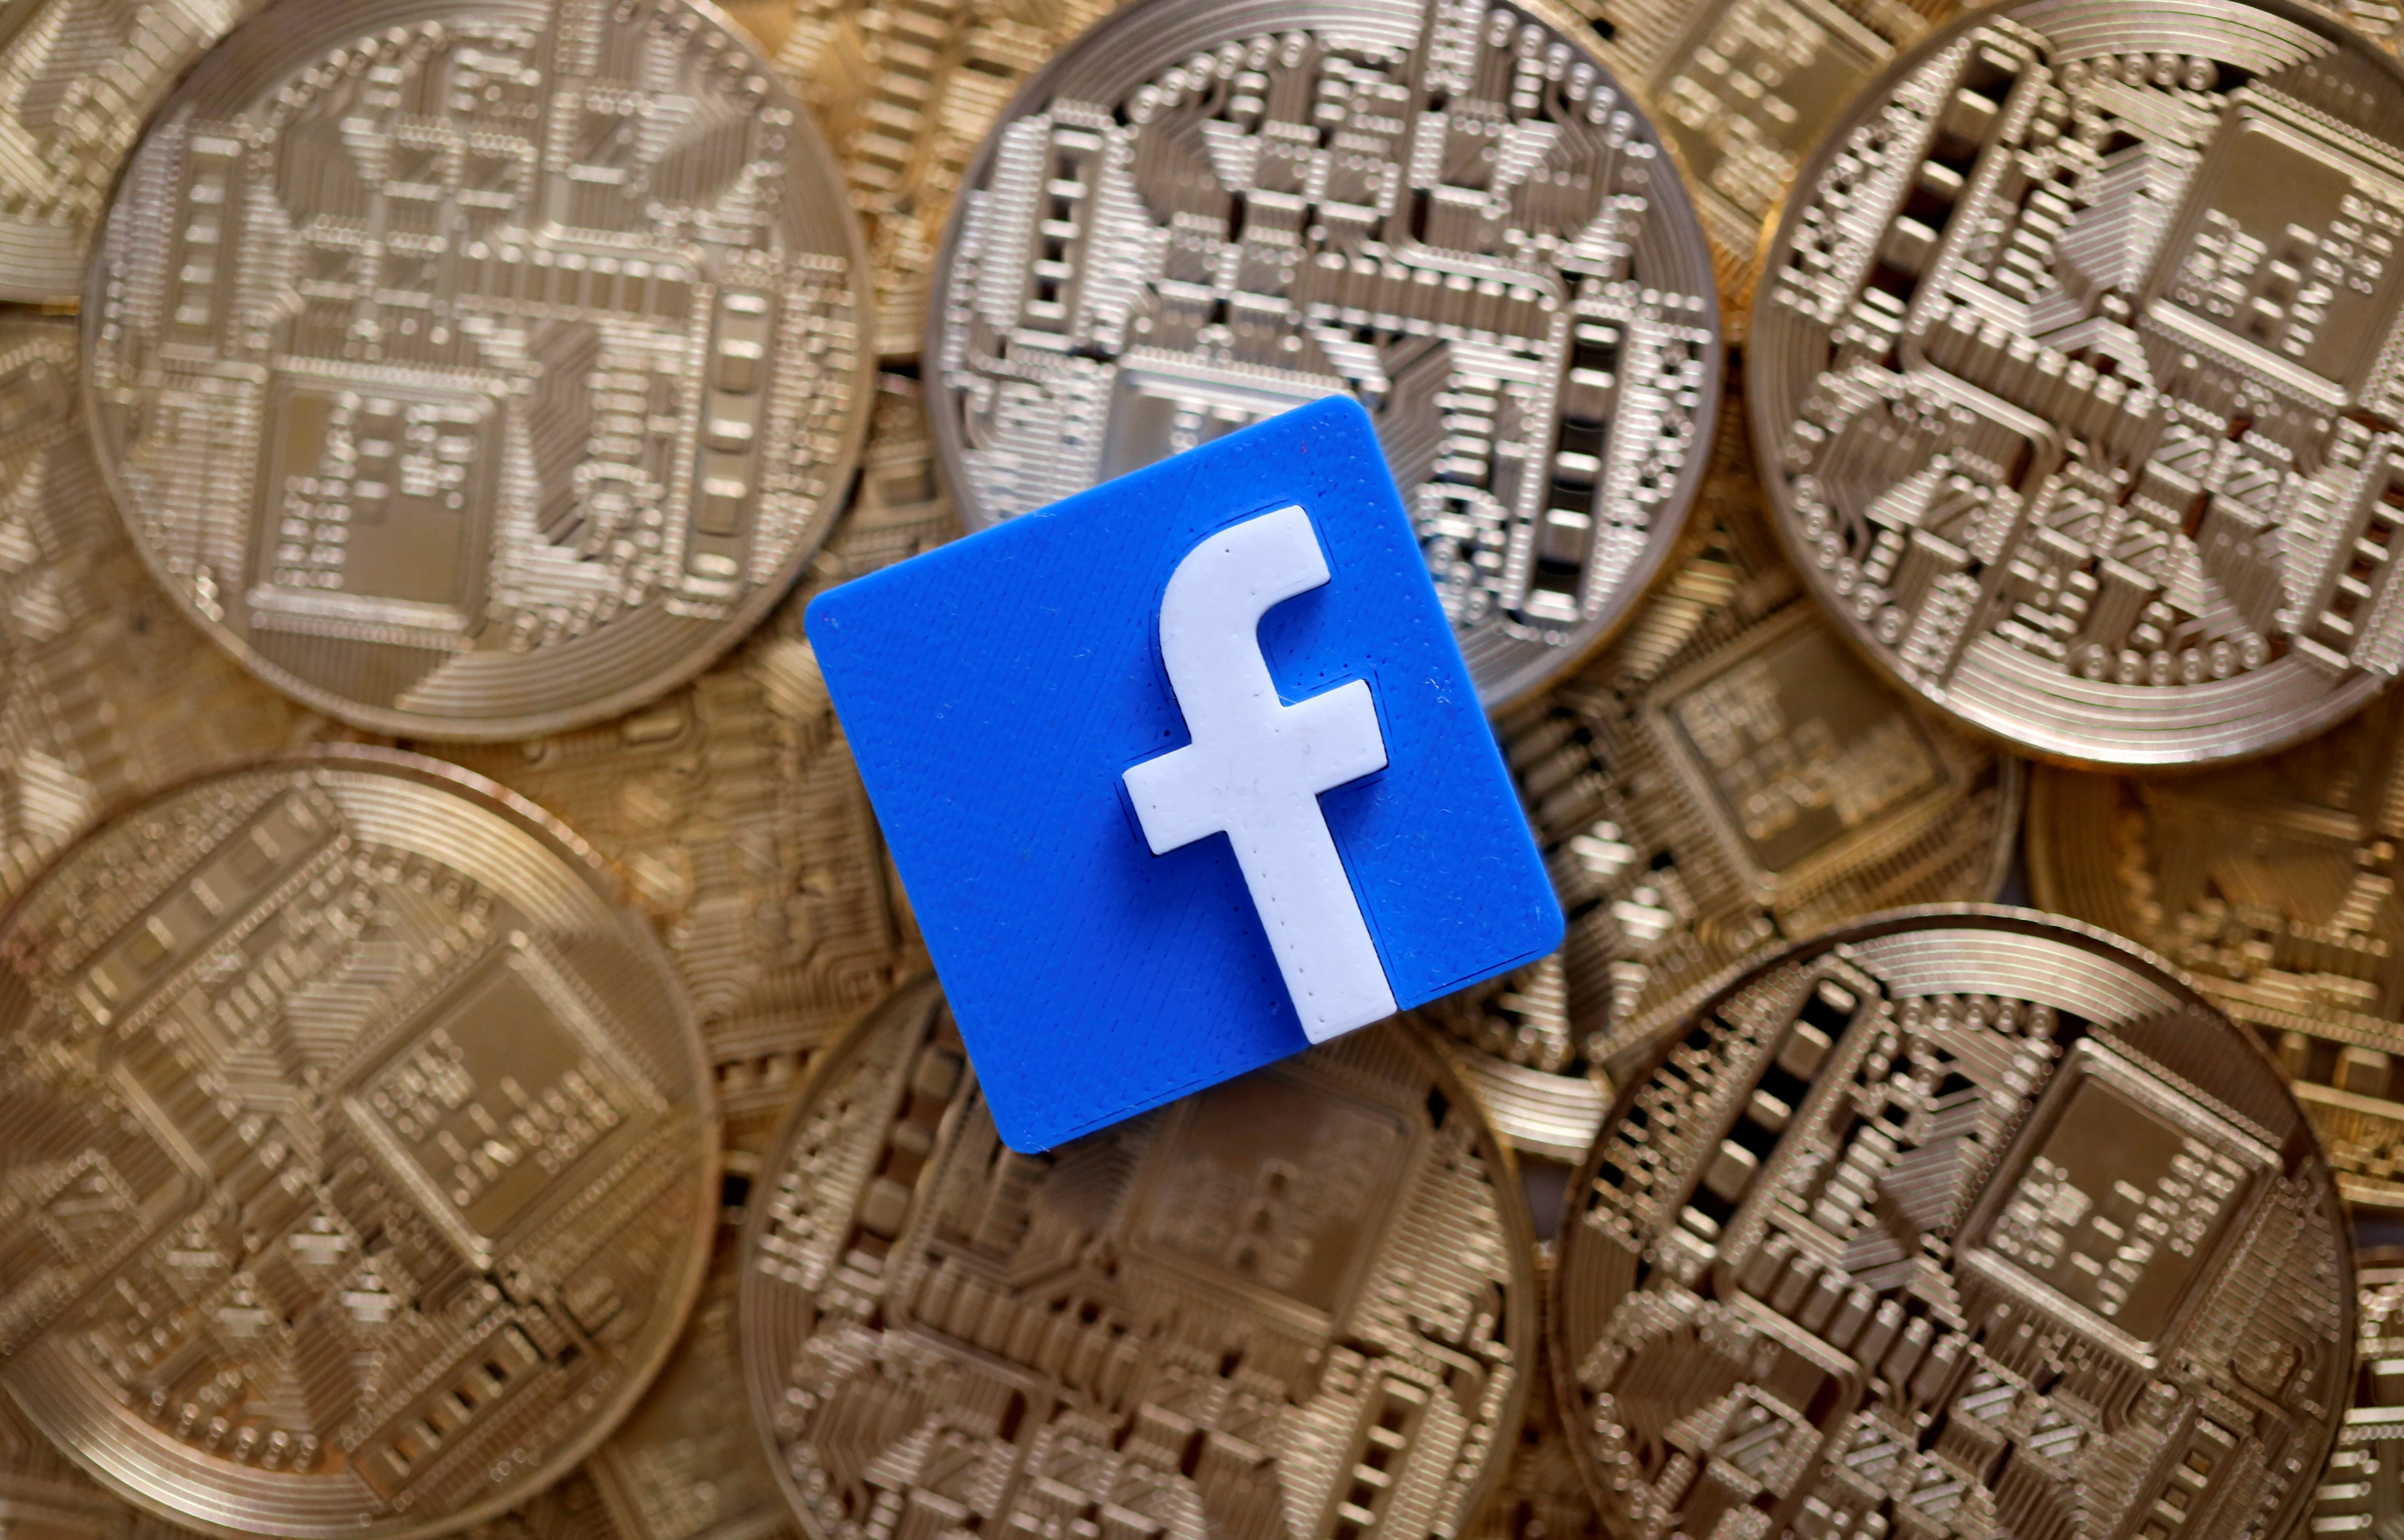 Facebook is set to launch Libra next year. Photo: Reuters